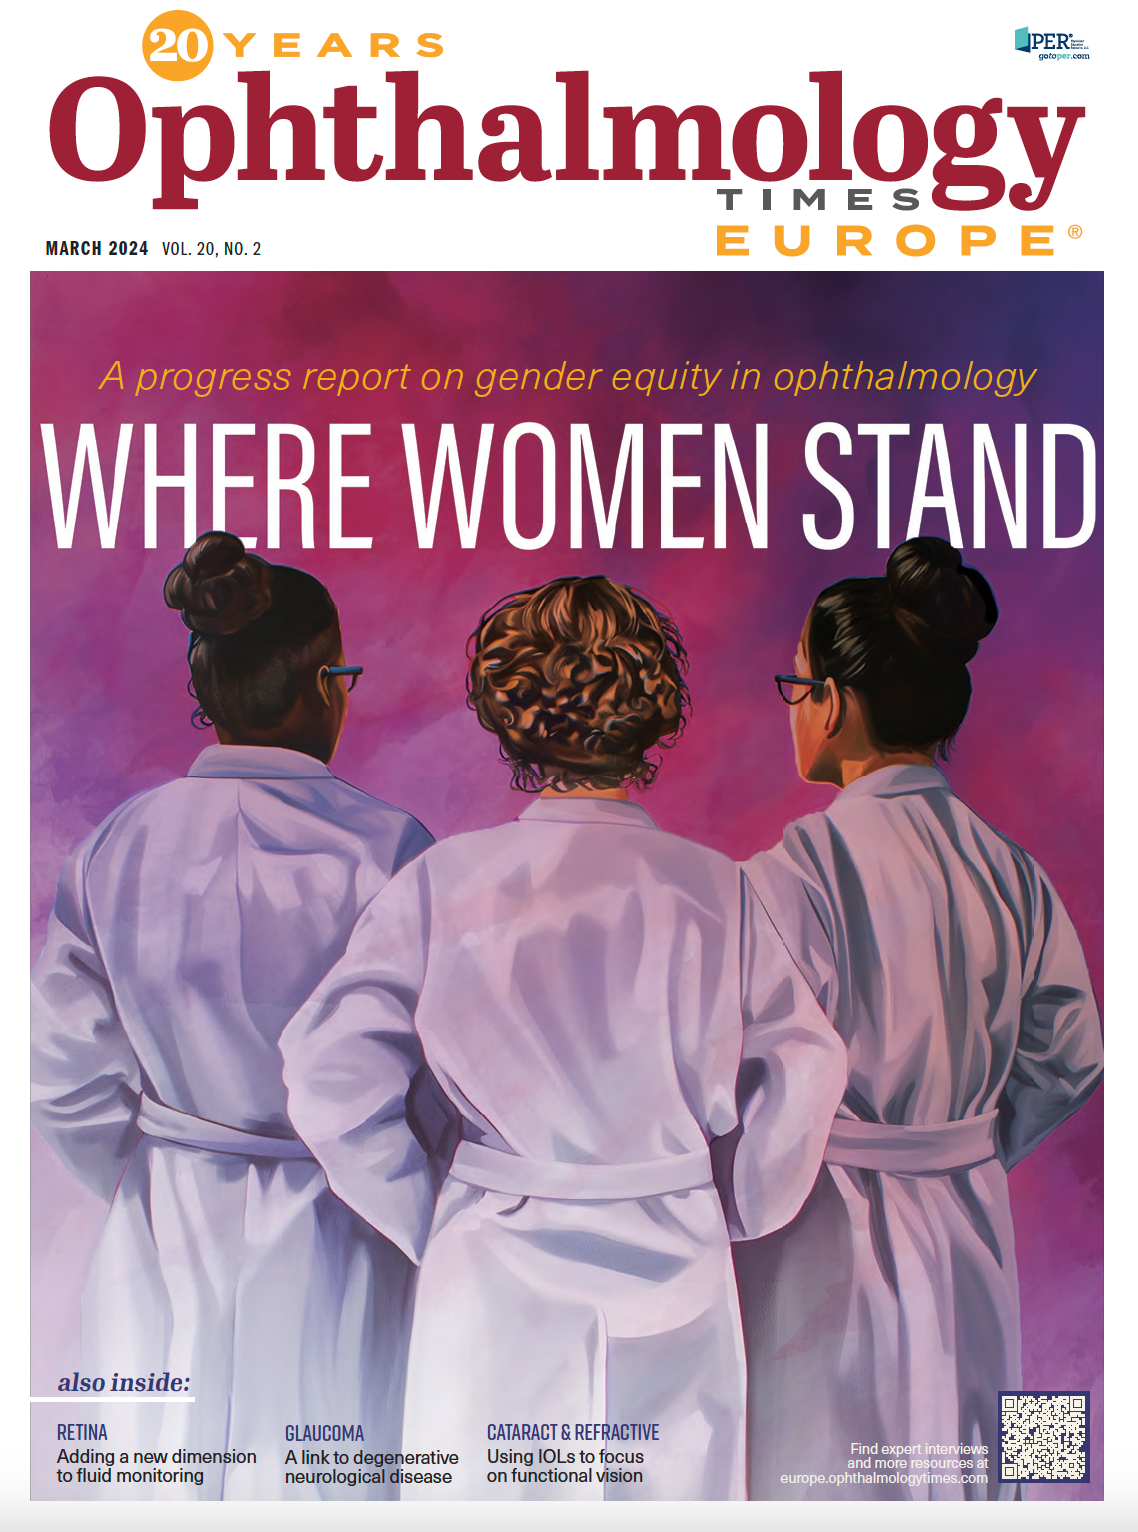 The cover of Ophthalmology Times Europe March 2024. The cover story is "WHERE WOMEN STAND," and the image shows three women in white lab coats with their backs facing the viewer.